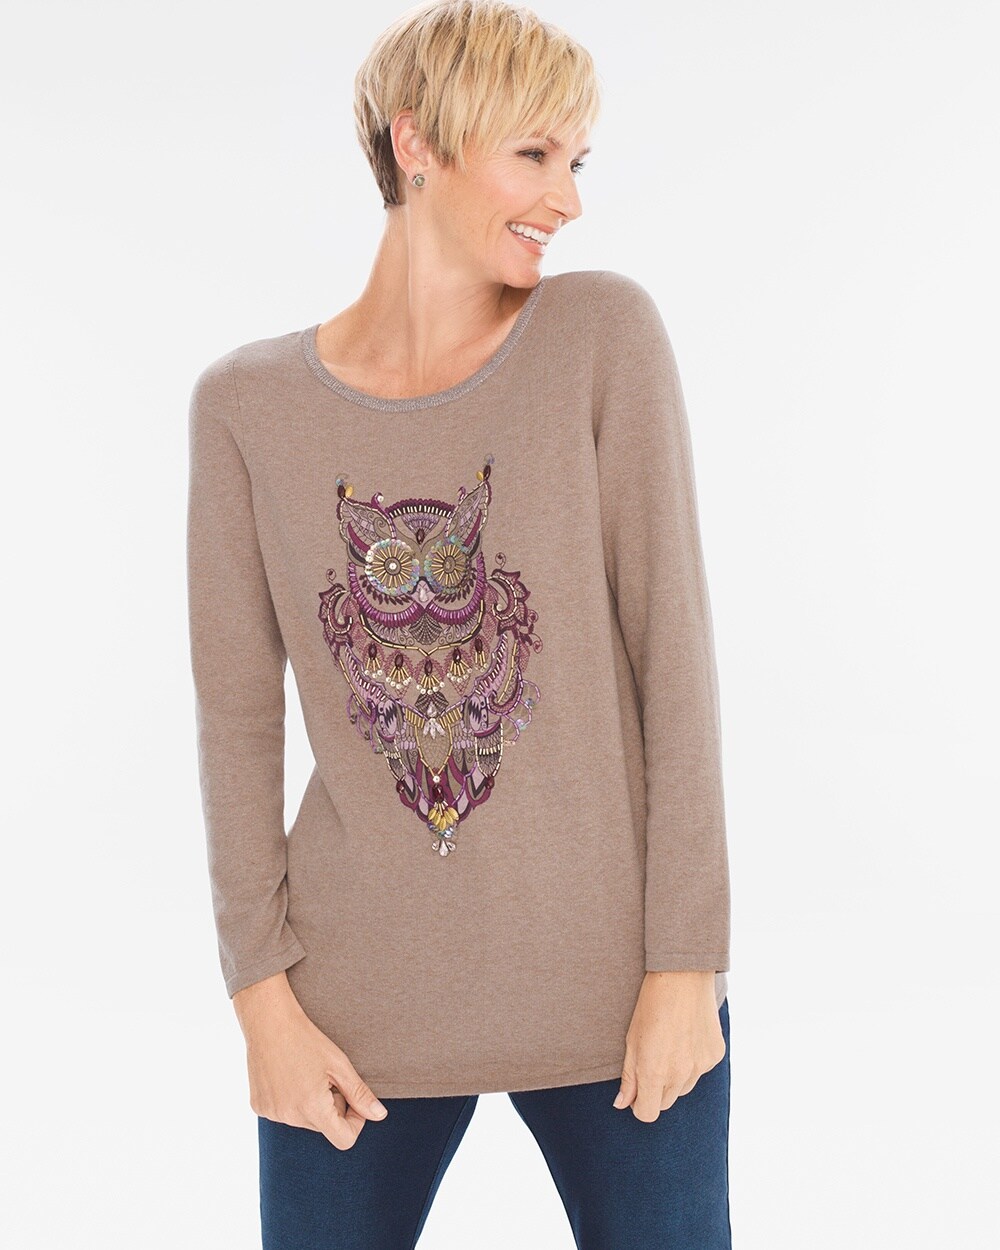 Zenergy Cotton-Cashmere Blend Jeweled Owl Top